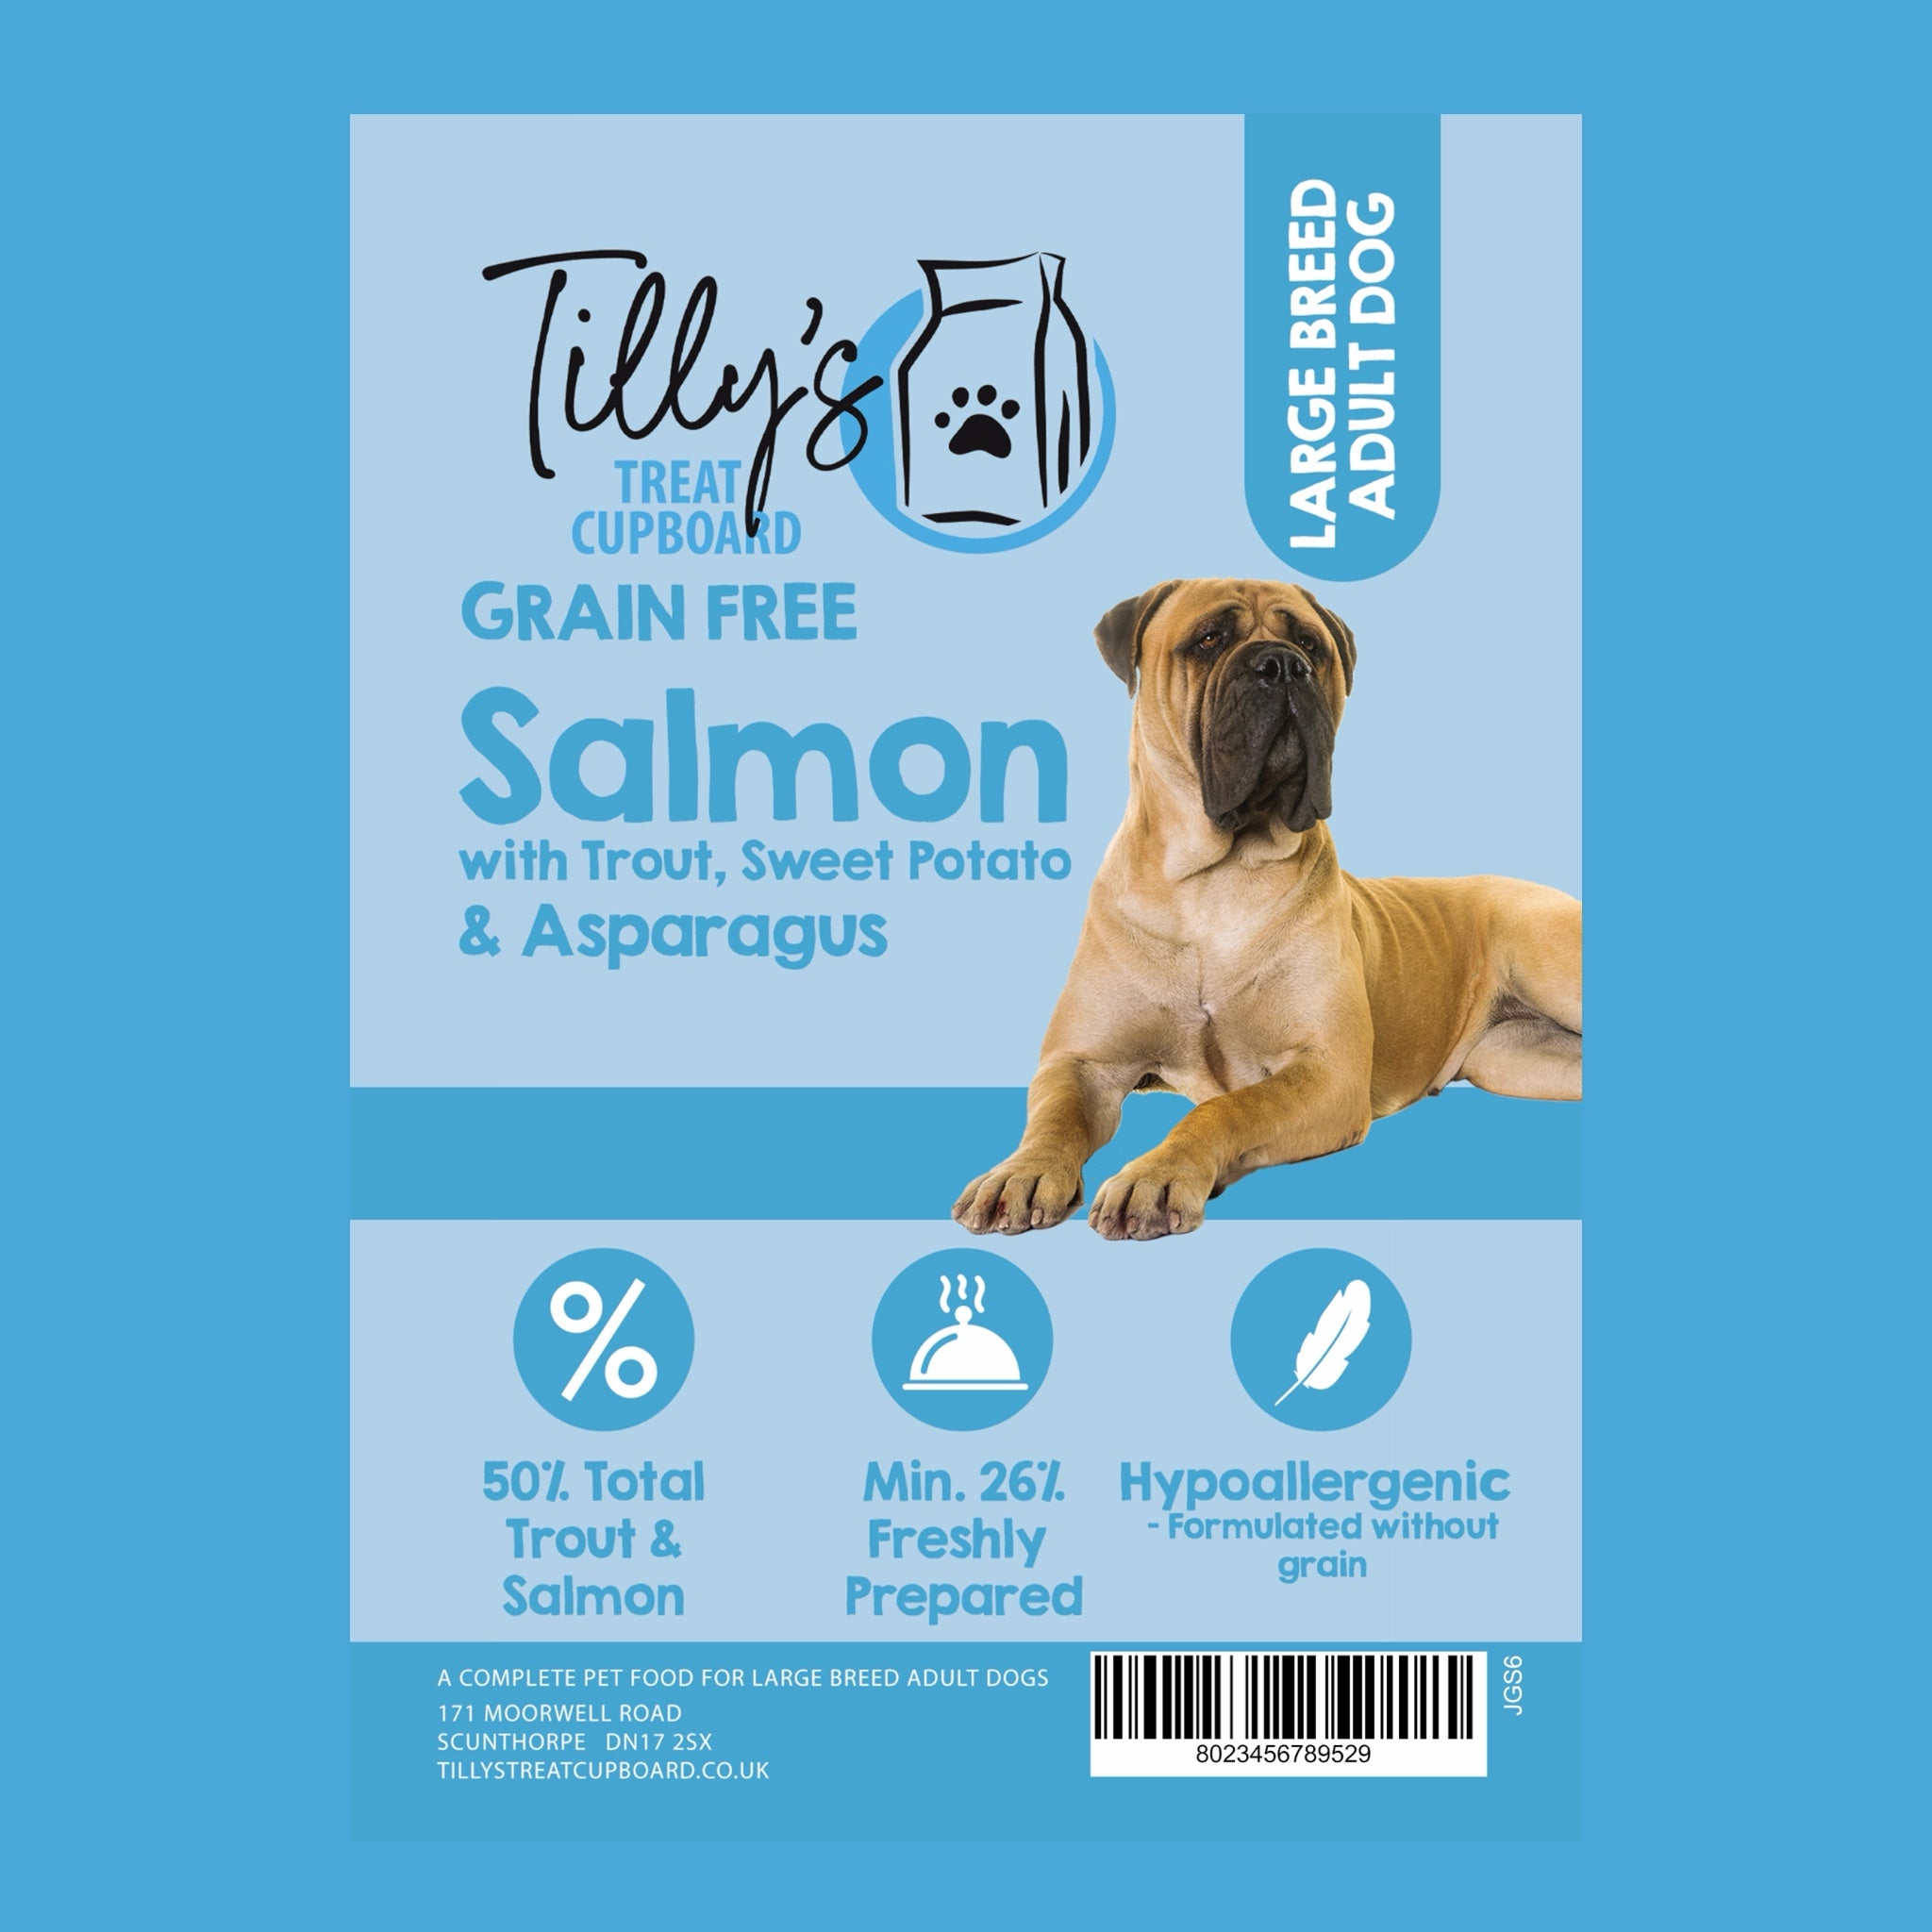 Tilly's Brown Bag LARGE BREED ADULT Dog Salmon with Trout, Sweet Potato and Aspargus